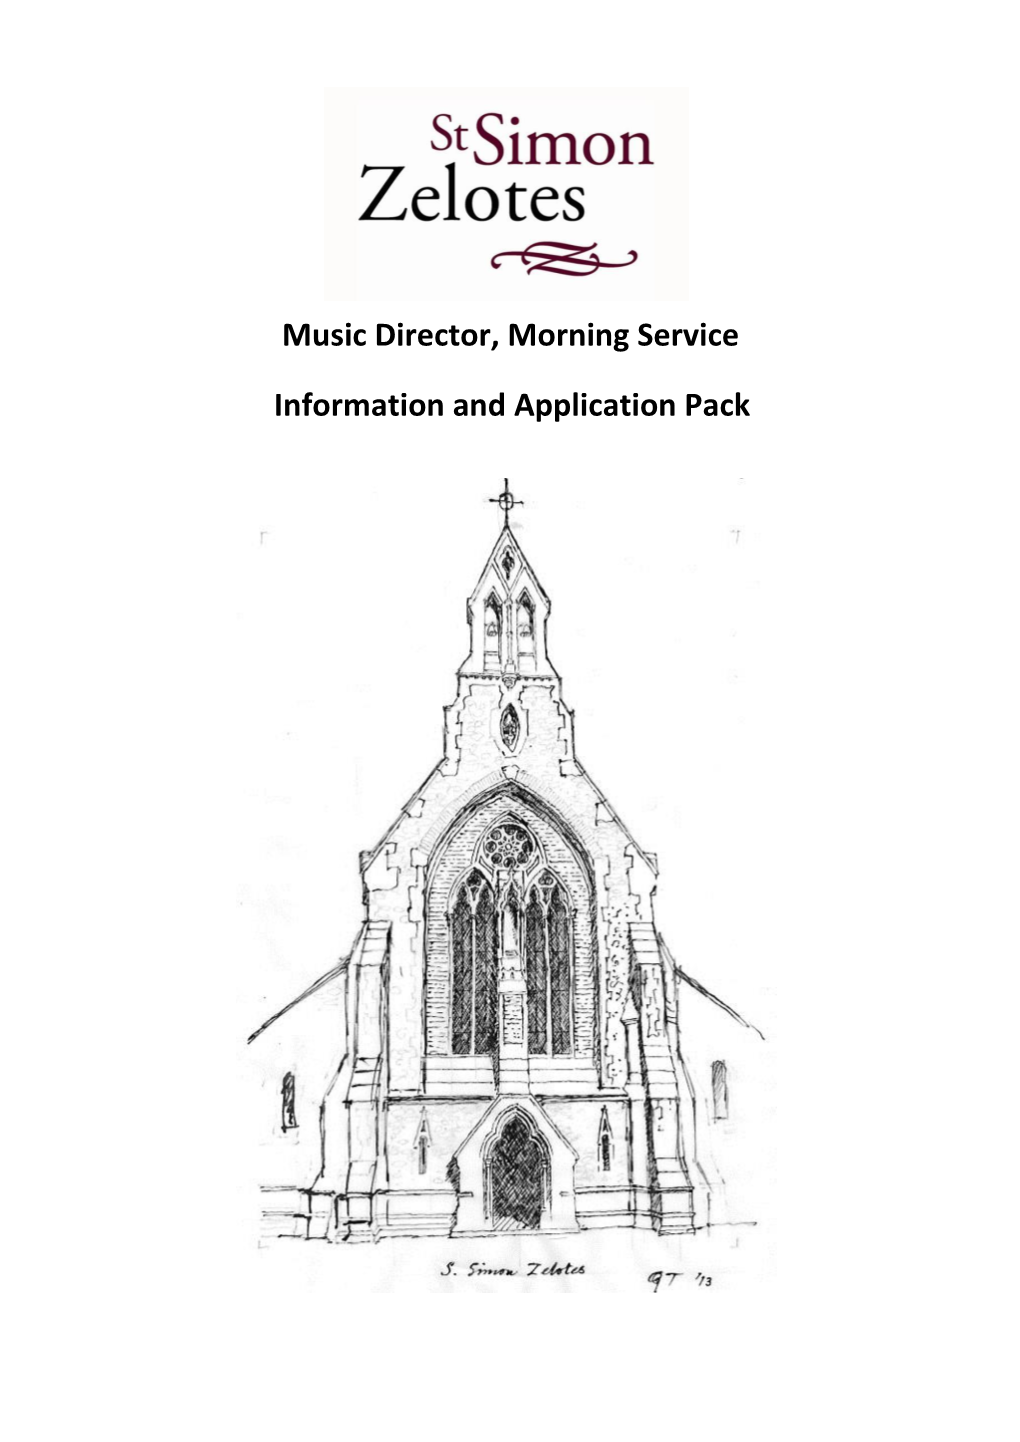 Music Director, Morning Service Information and Application Pack